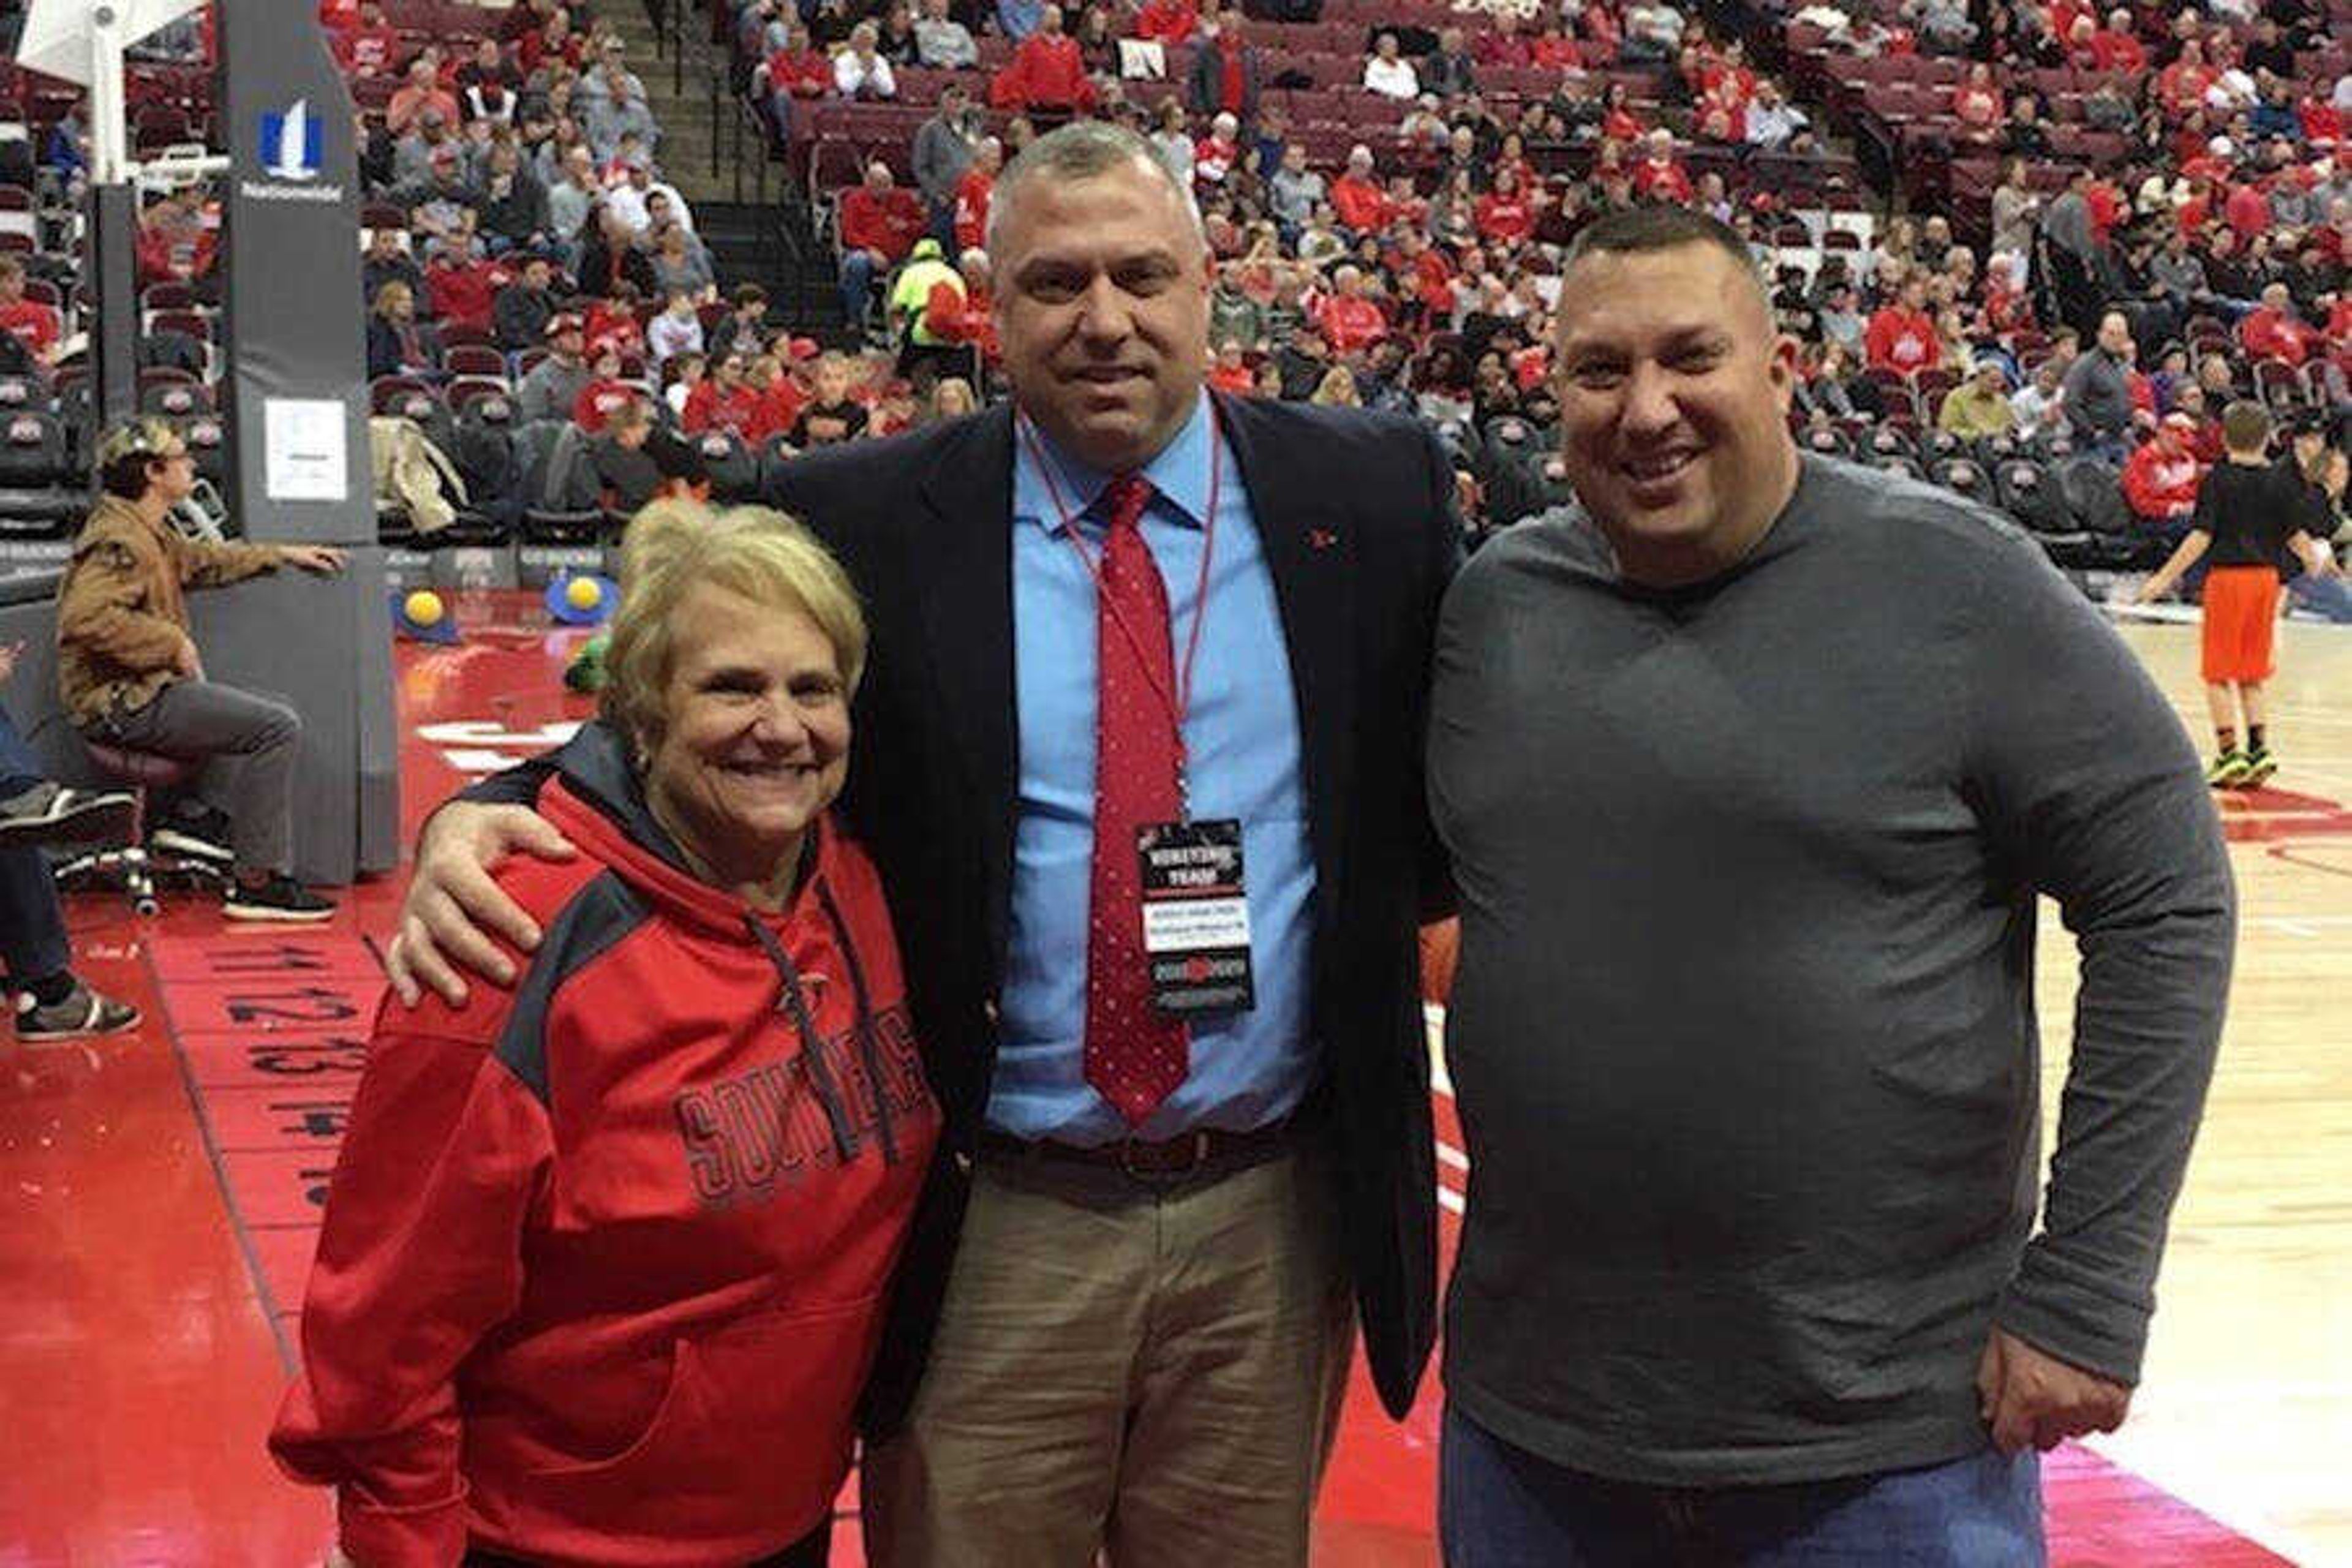 Jeff Honza (Middle), with his mother, Terri (Left), and his brother, Patrick (right) at the Redhawks basketball game vs Ohio State on Dec. 17, 2019.